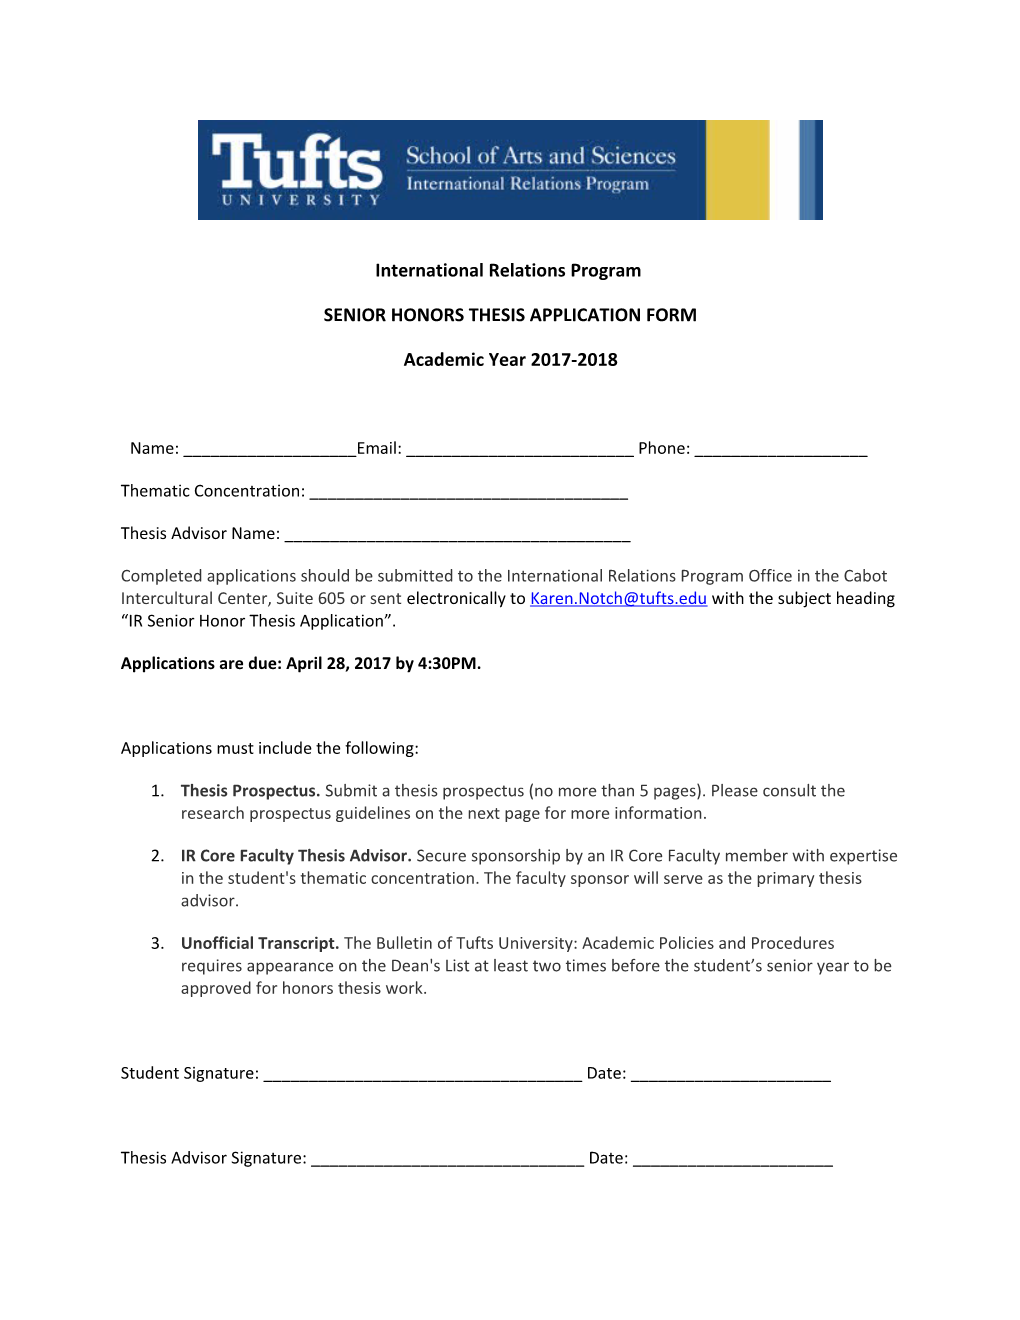 Senior Honors Thesis Application Form